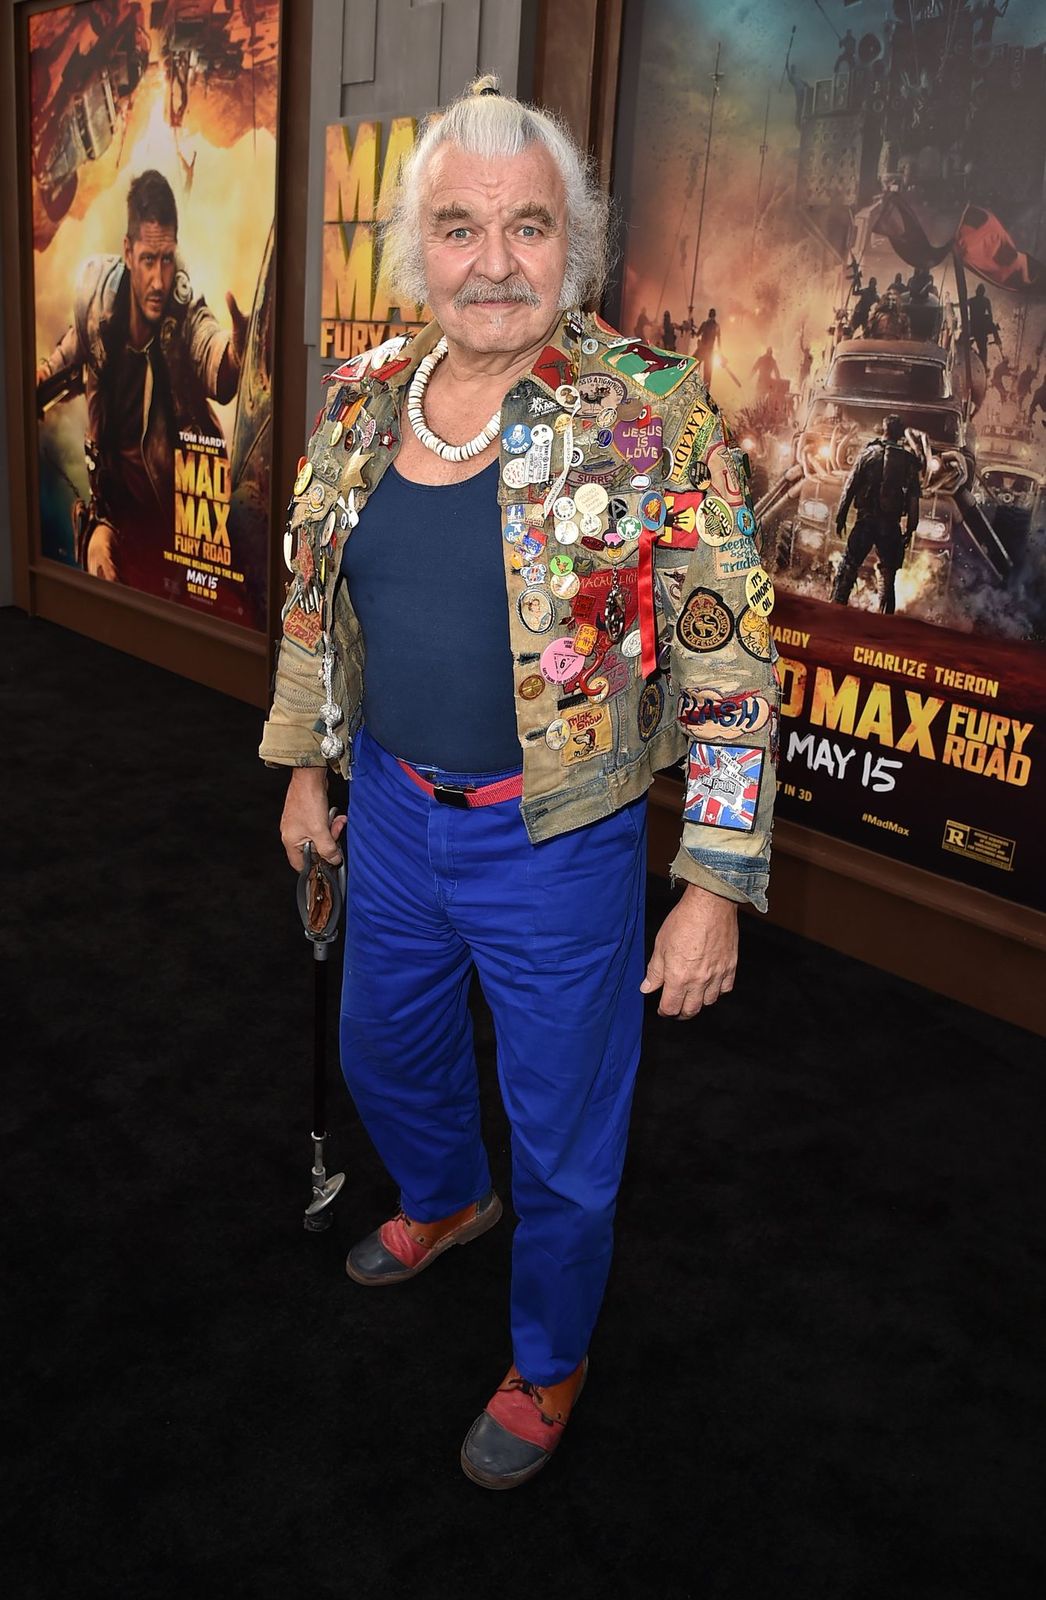 Hugh Keays-Byrne at the premiere of "Mad Max: Fury Road" on May 7, 2015, in Hollywood, California | Photo: Kevin Winter/Getty Images